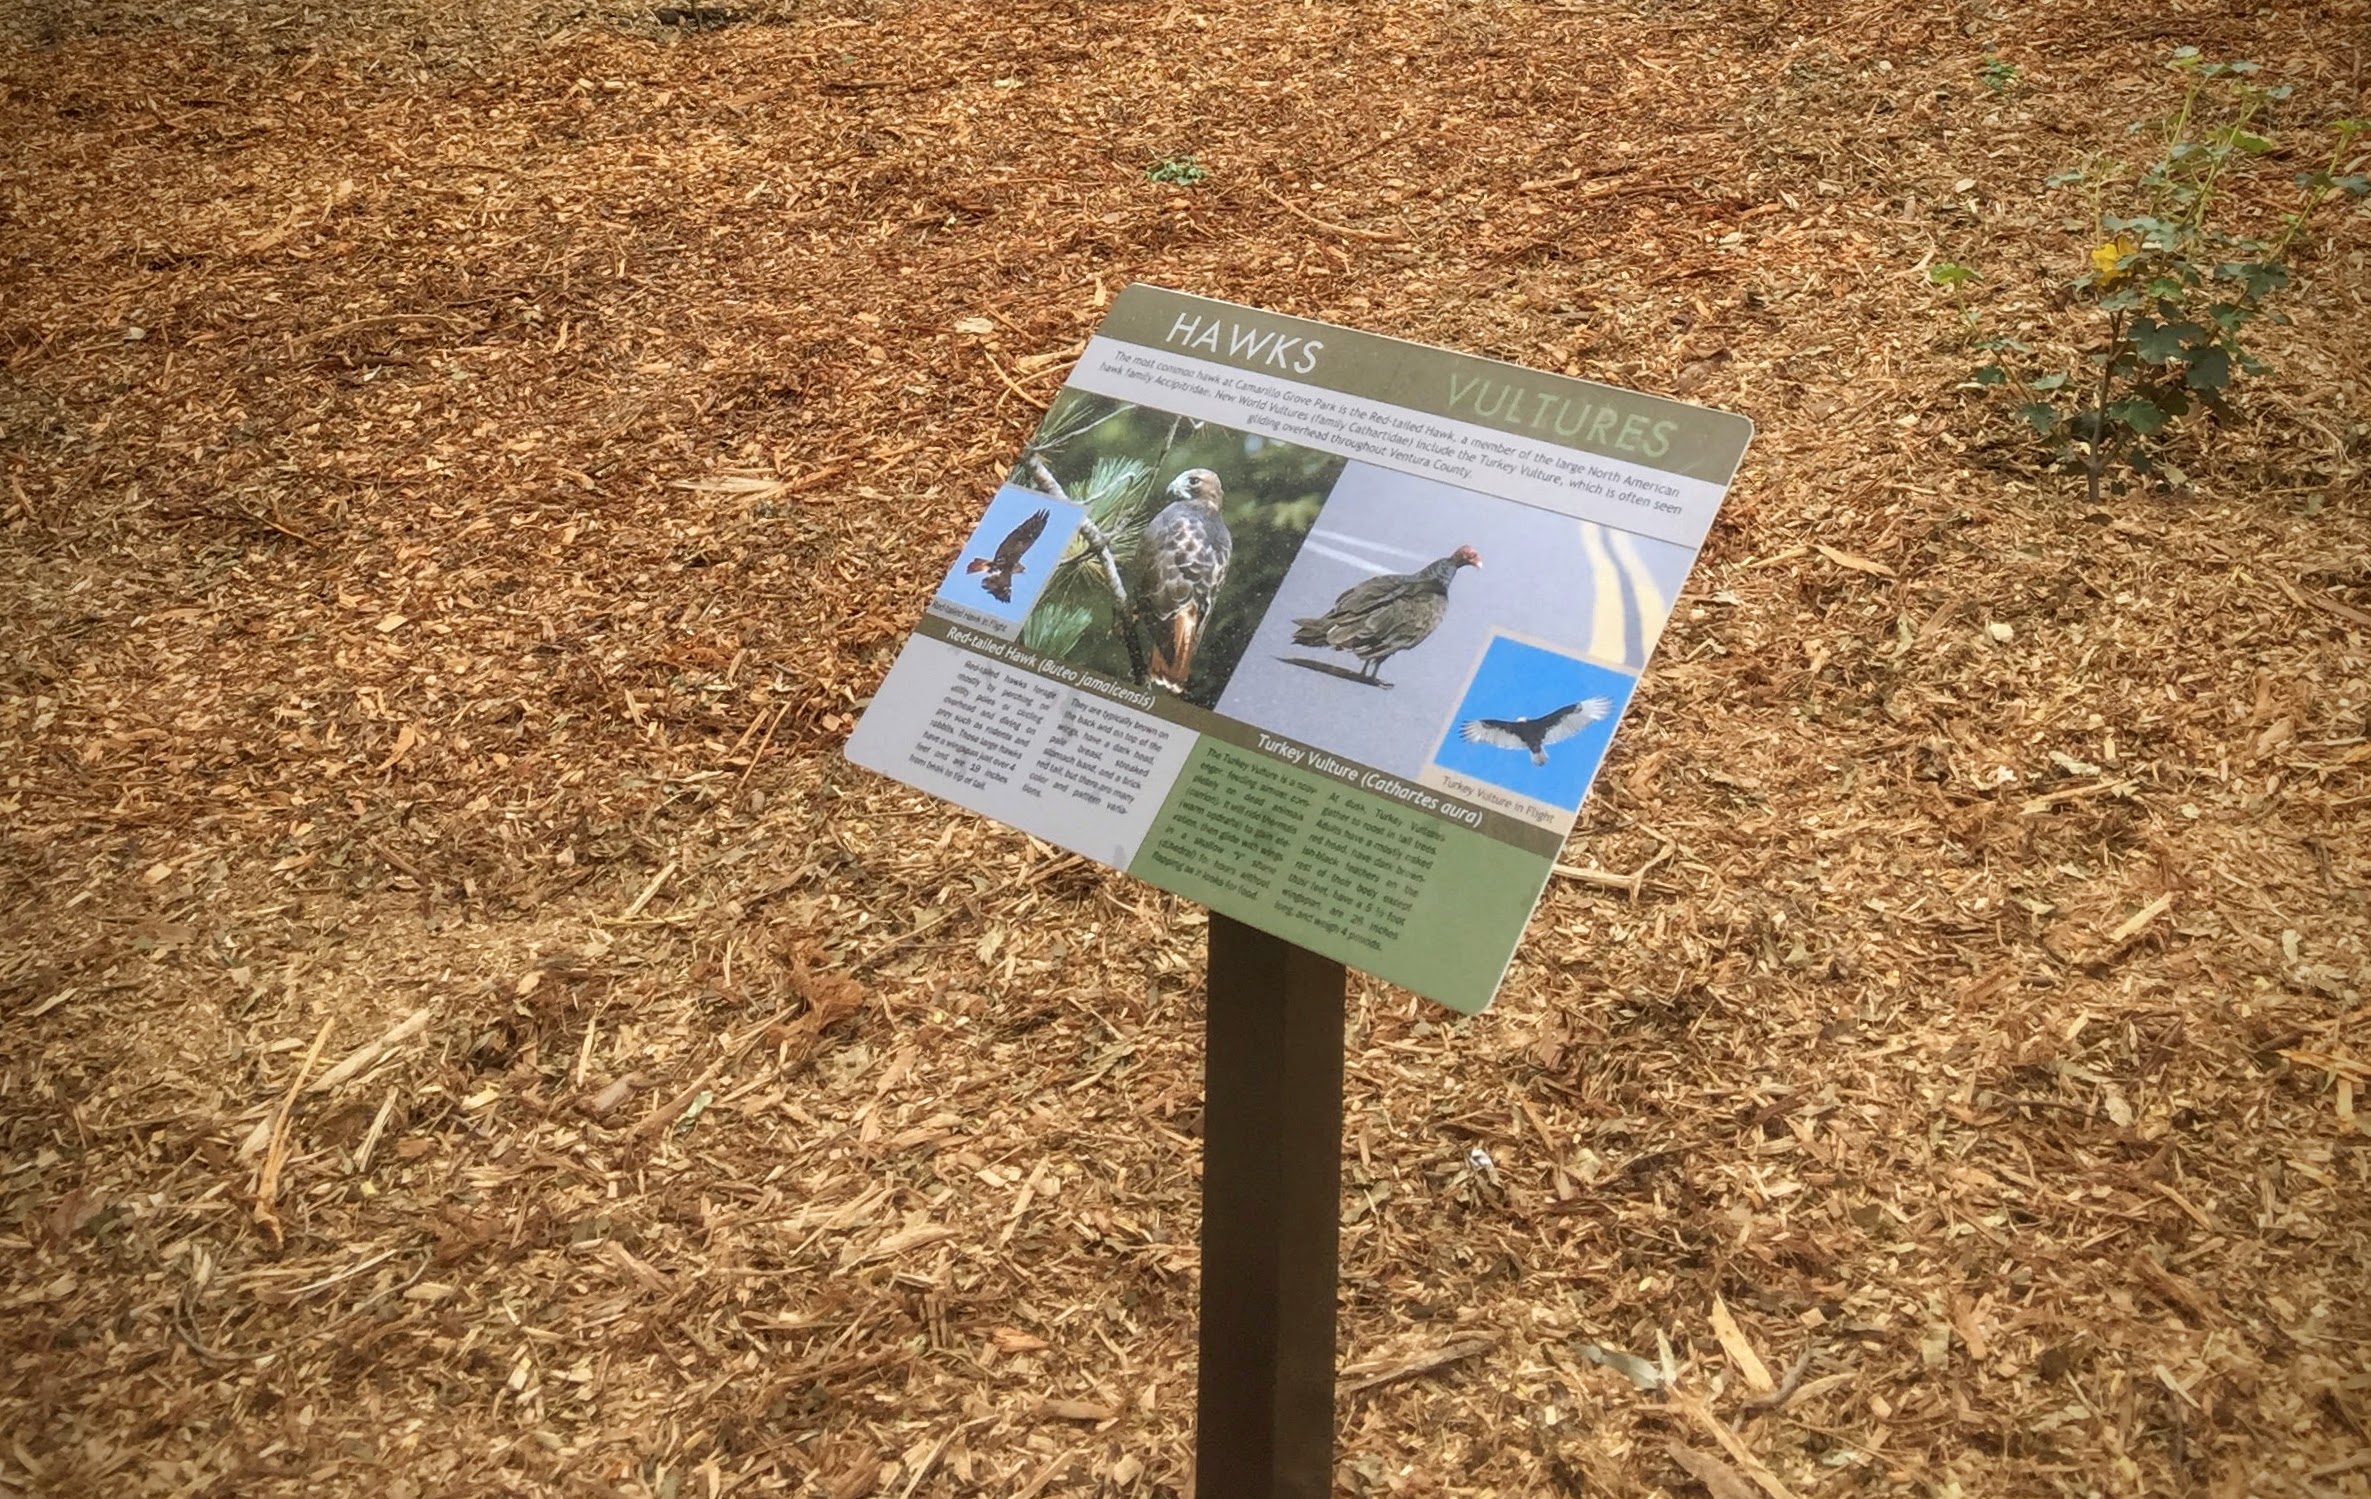 Custom signage along the Play Trail provides educational opportunities for children and families.